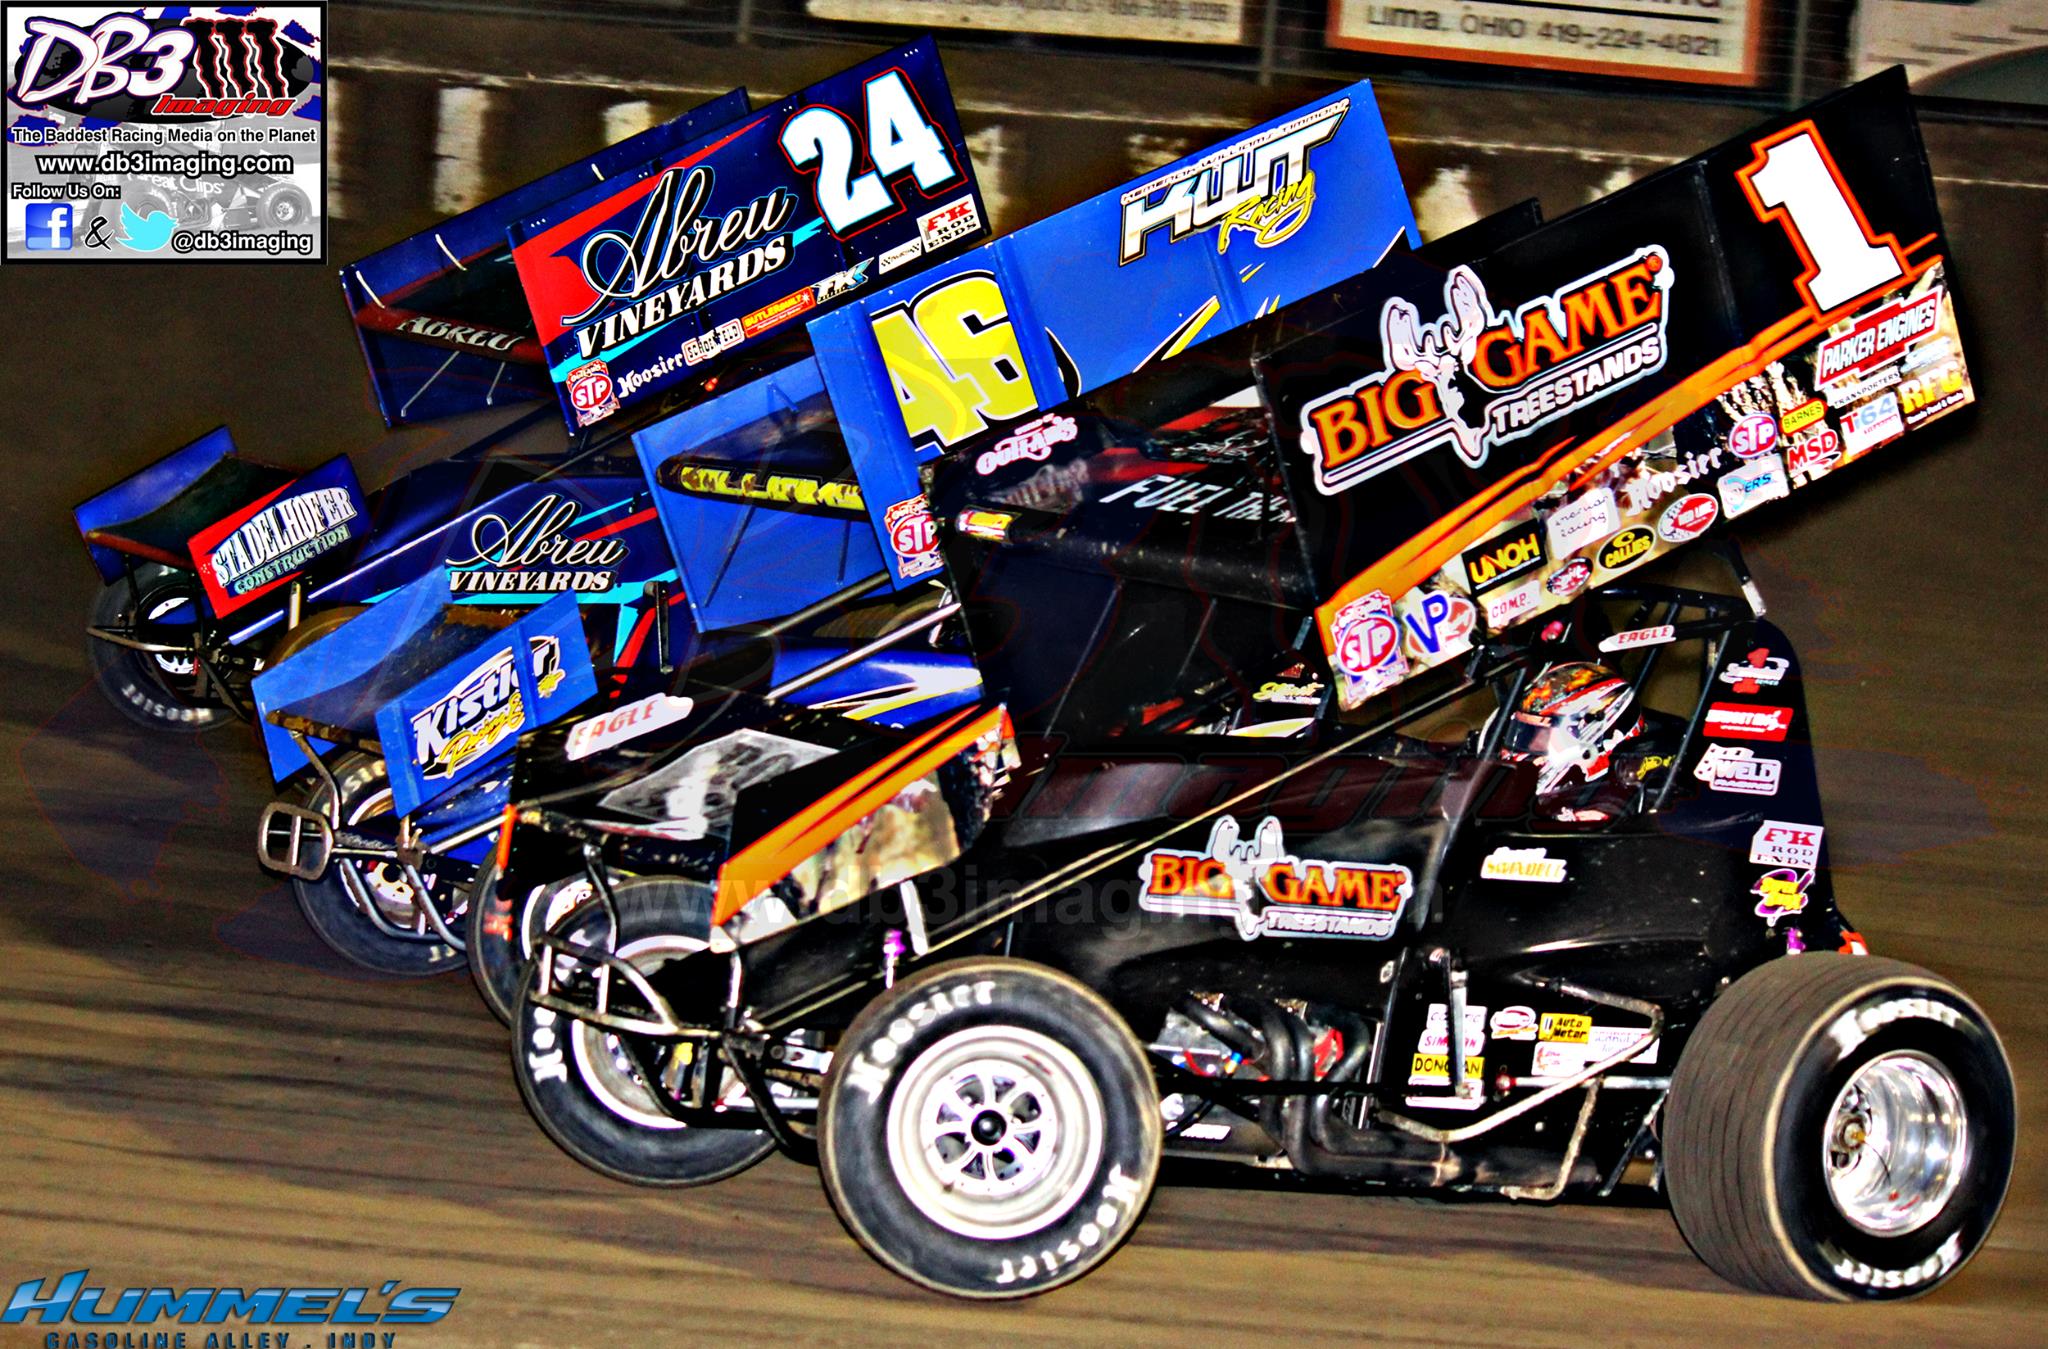 World Of Outlaws Sprint Cars